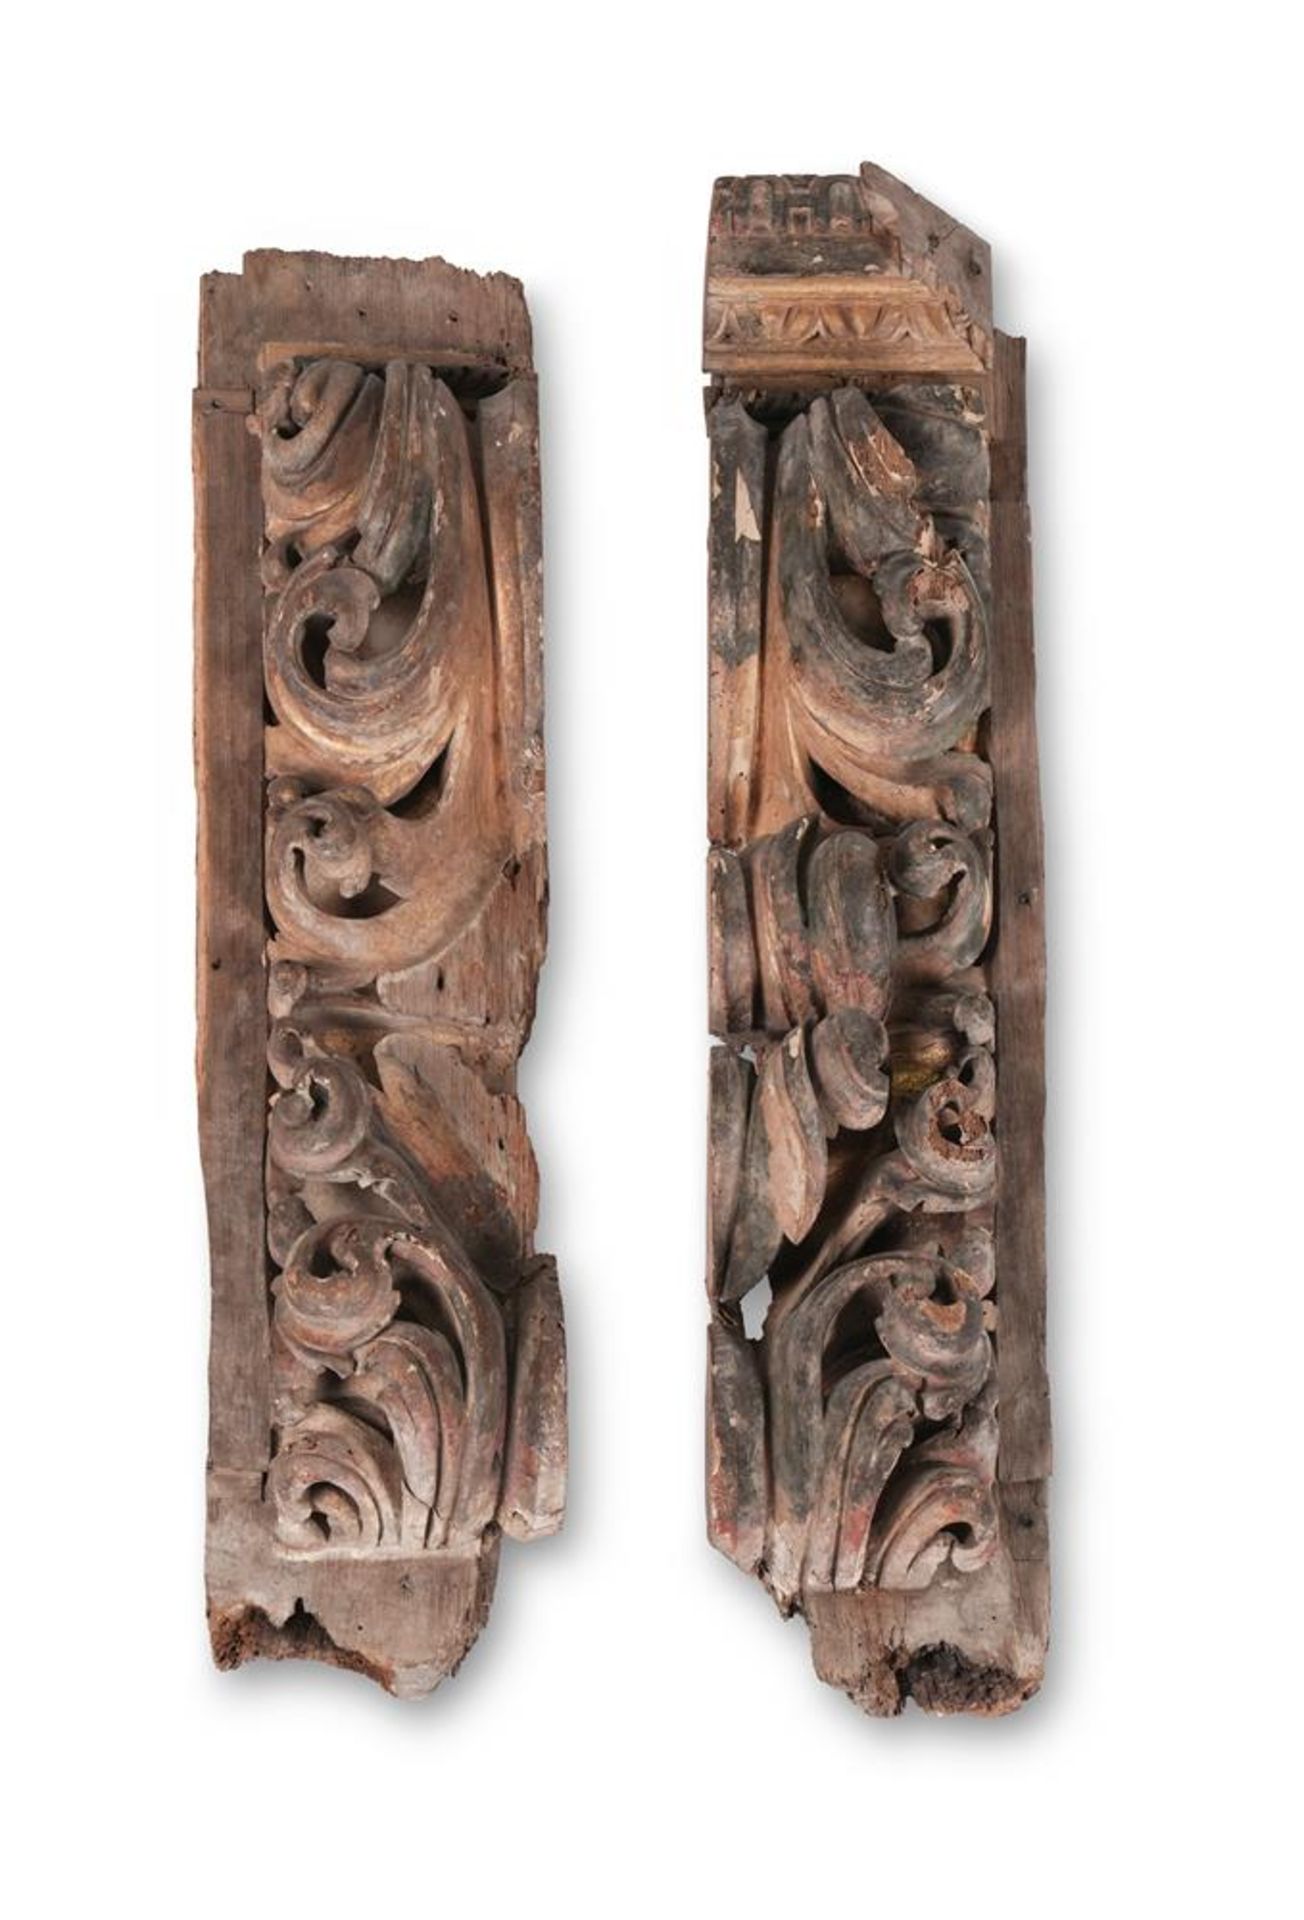 TWO PORTUGUESE CARVED GILTWOOD ARCHITECTURAL ELEMENTS